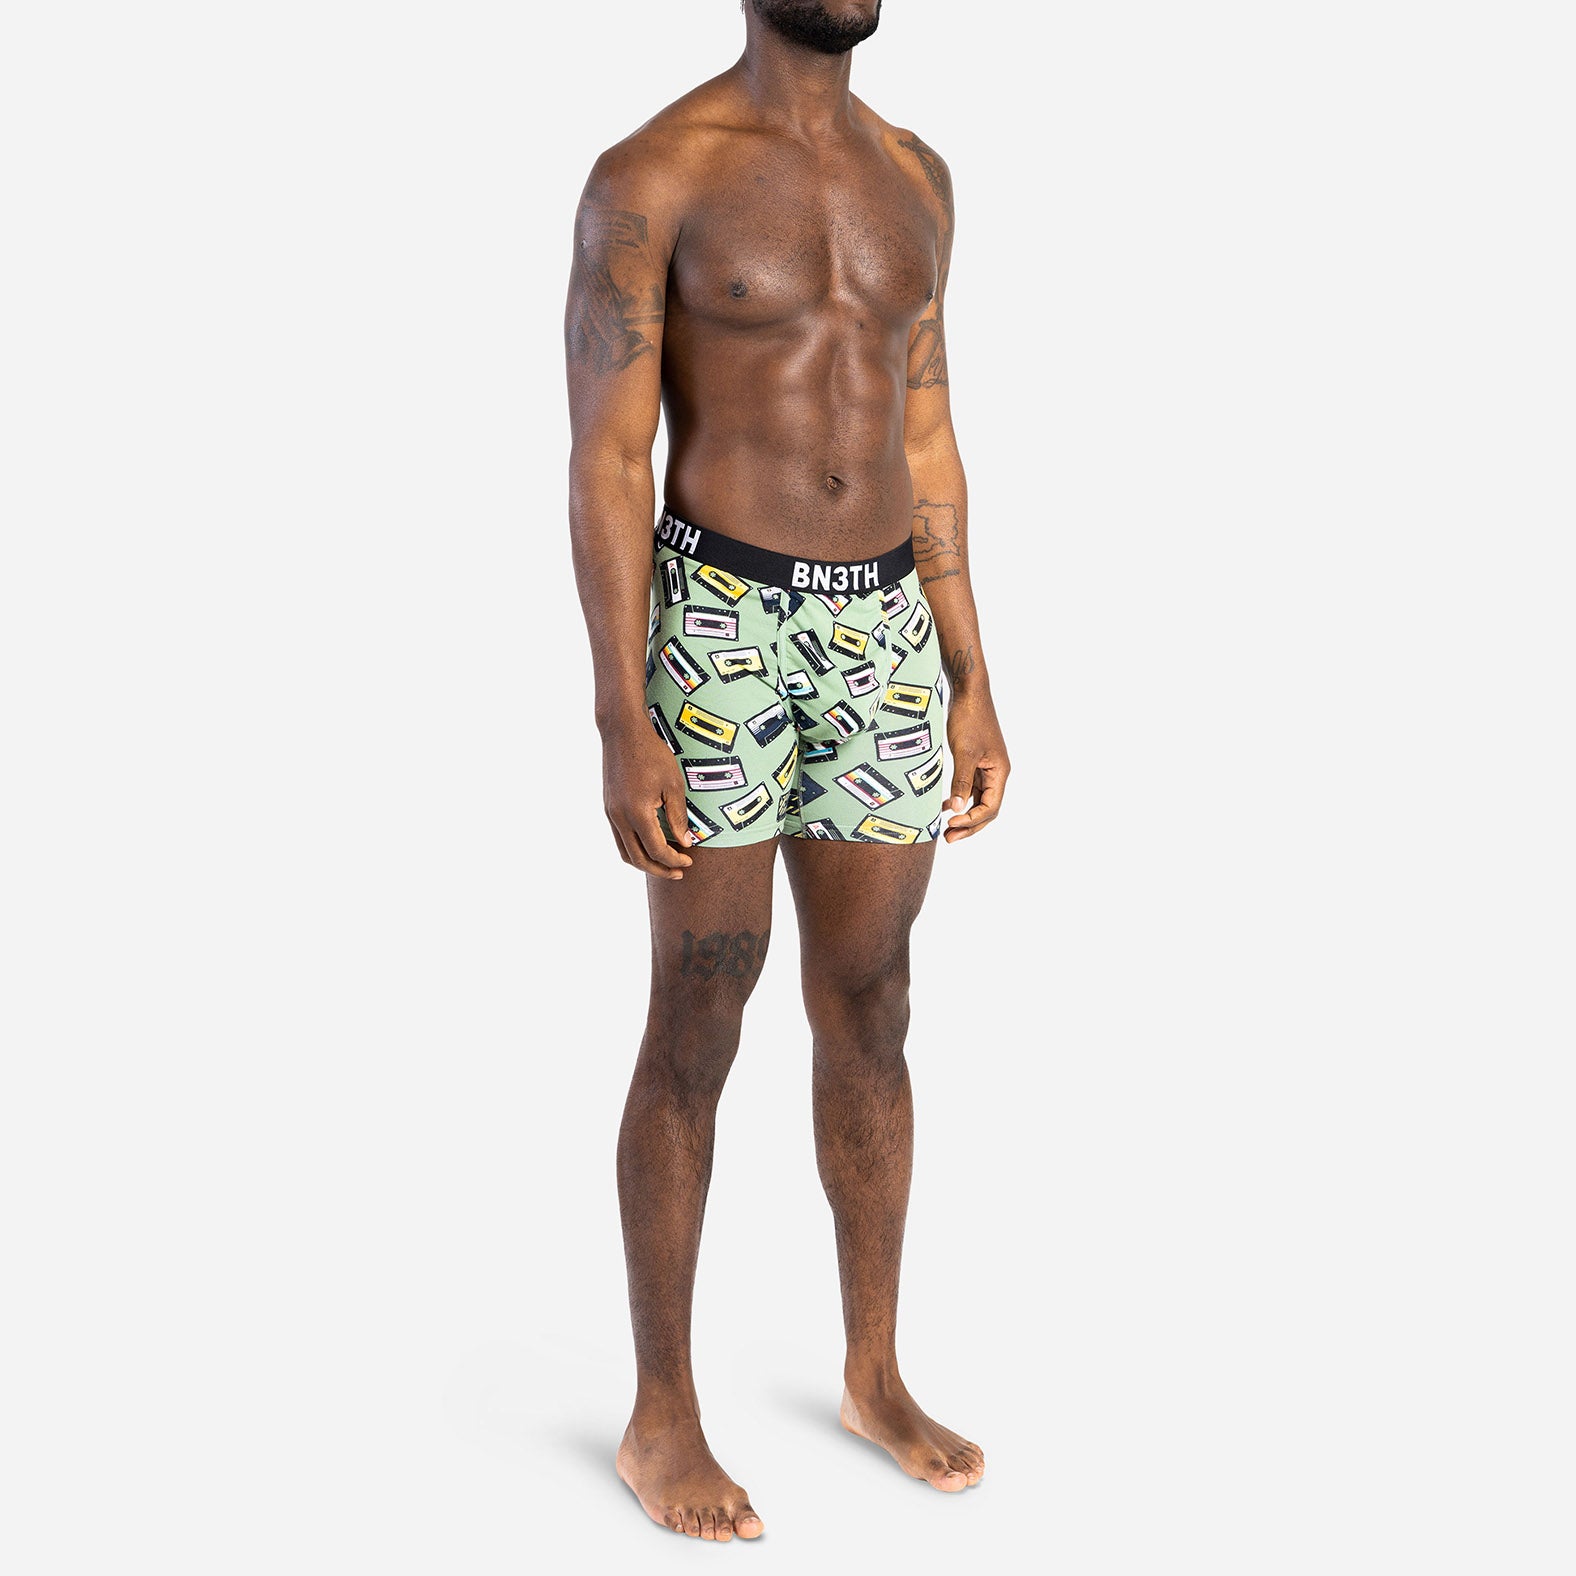 OUTSET BOXER BRIEF: NAVAL/CASSETTE MADNESS CEDAR 2 PACK